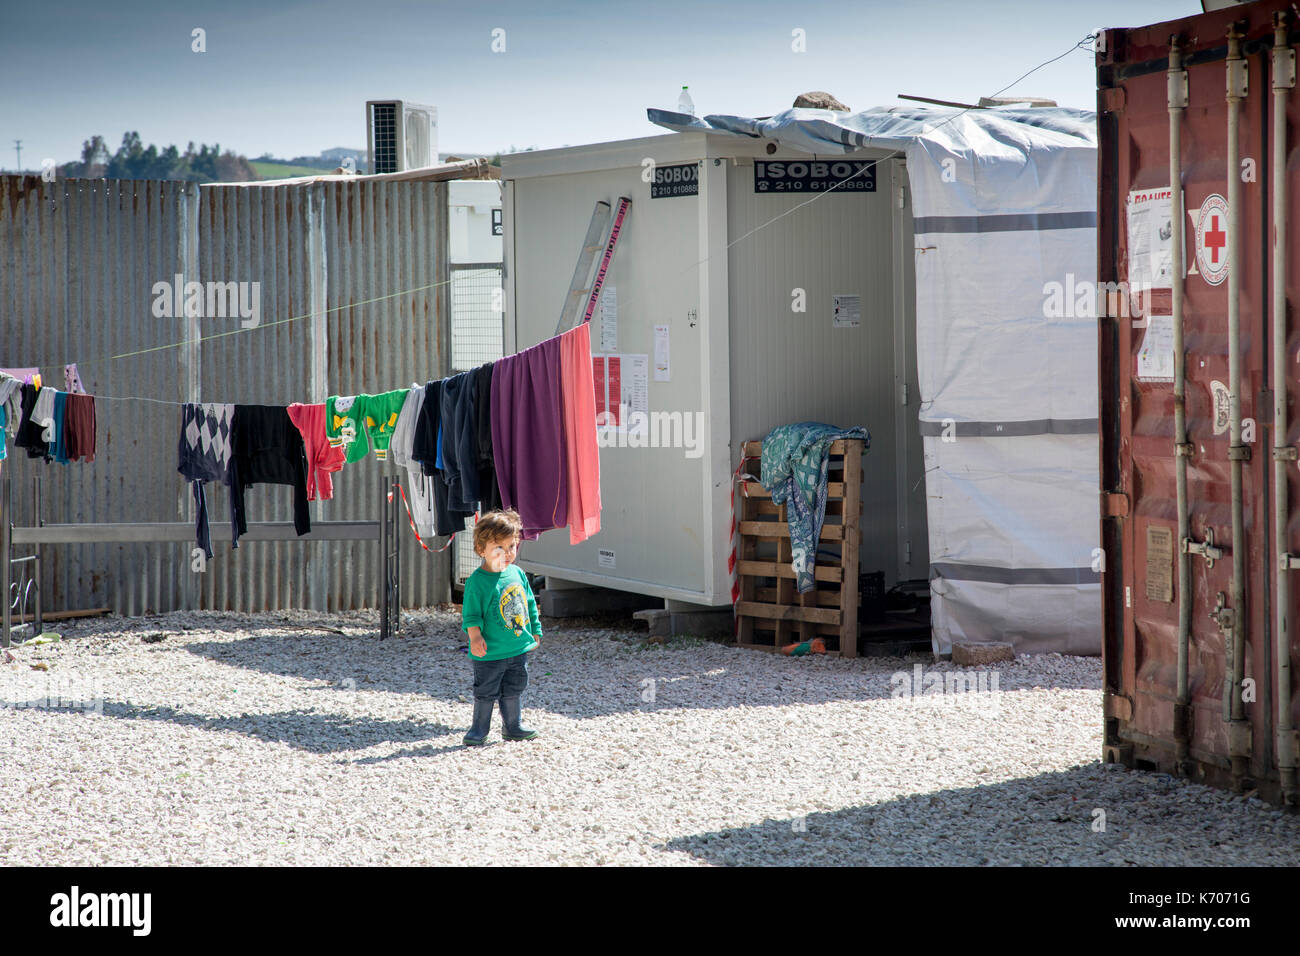 On the gravel between prefabricated units housing refugees from Syria, a lone child surveys Ritsona Refugee Camp. Foreground- a Red Cross container. Stock Photo